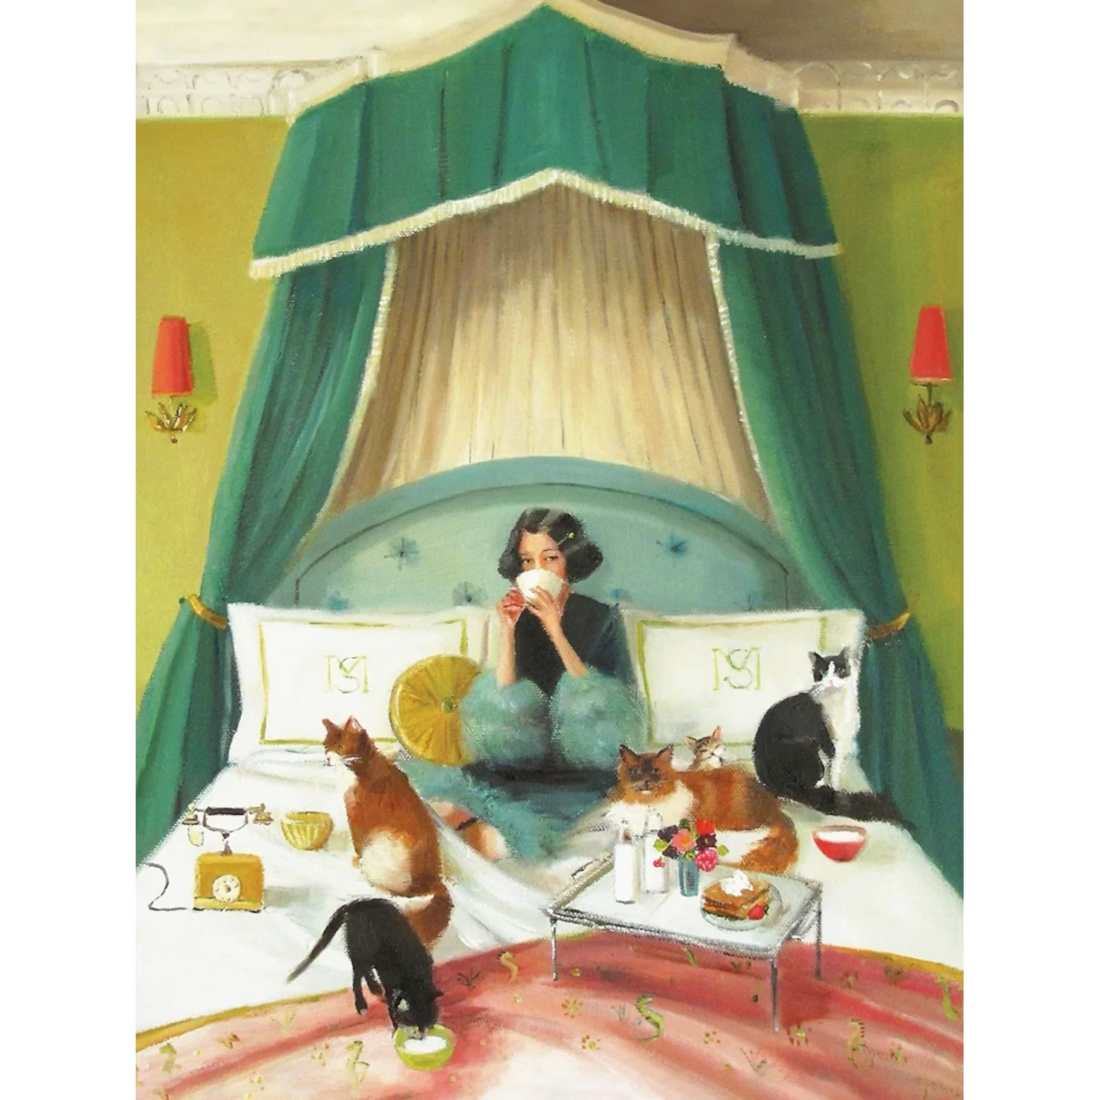 A whimsical painting of a woman sitting on a luxurious bed with cats, featuring the Breakfast in Bed Puzzle by New York Puzzle Company.